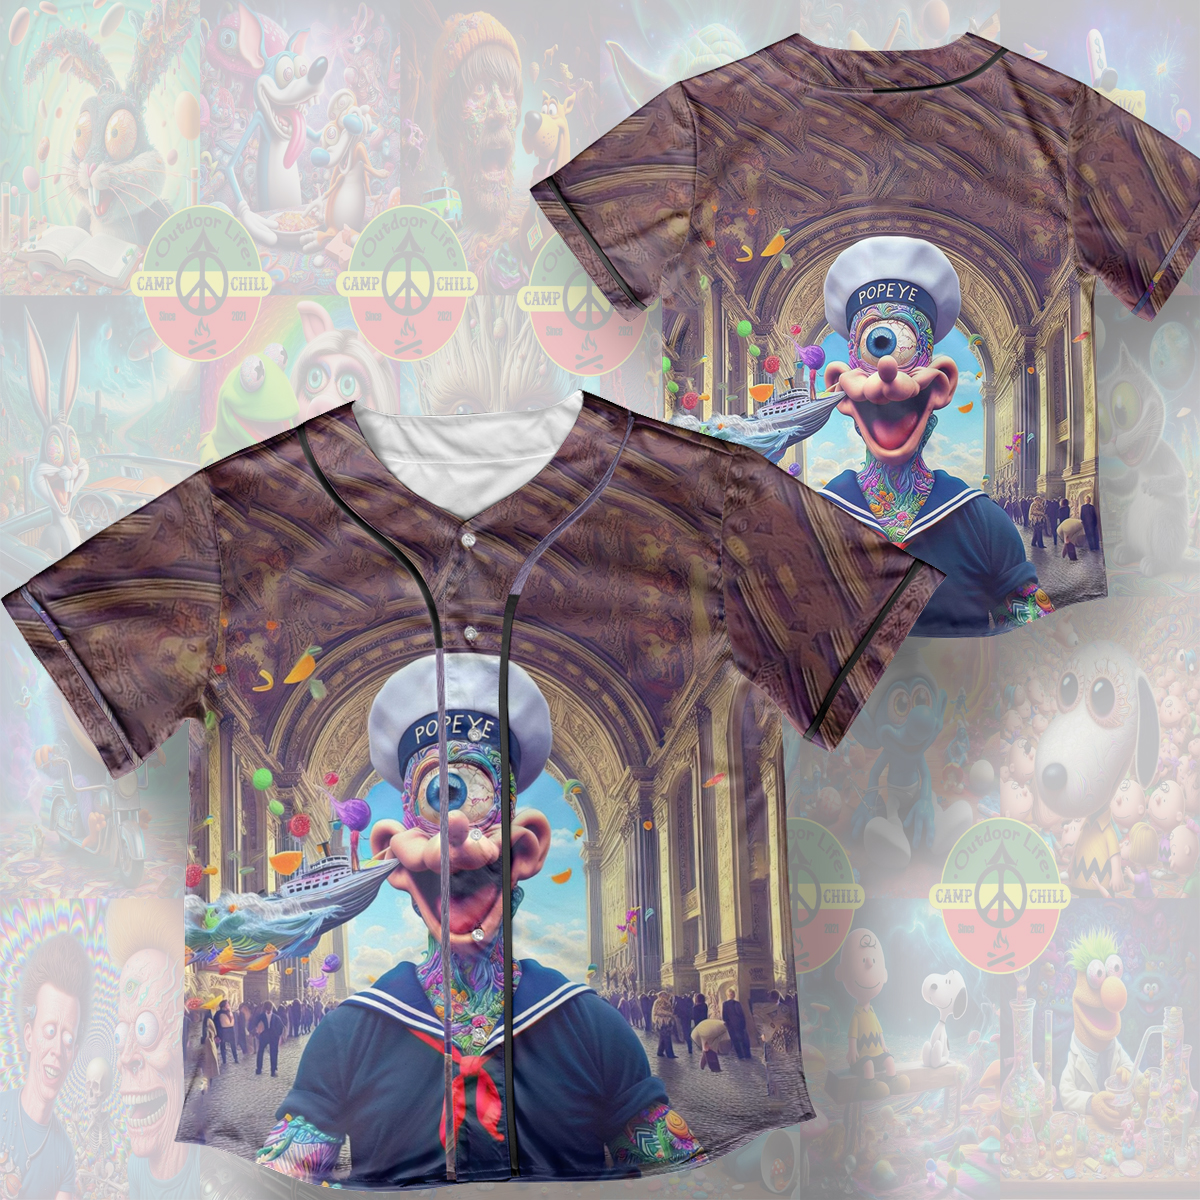 Popeye High Psychedelic Style Cover Rave Edm Jersey